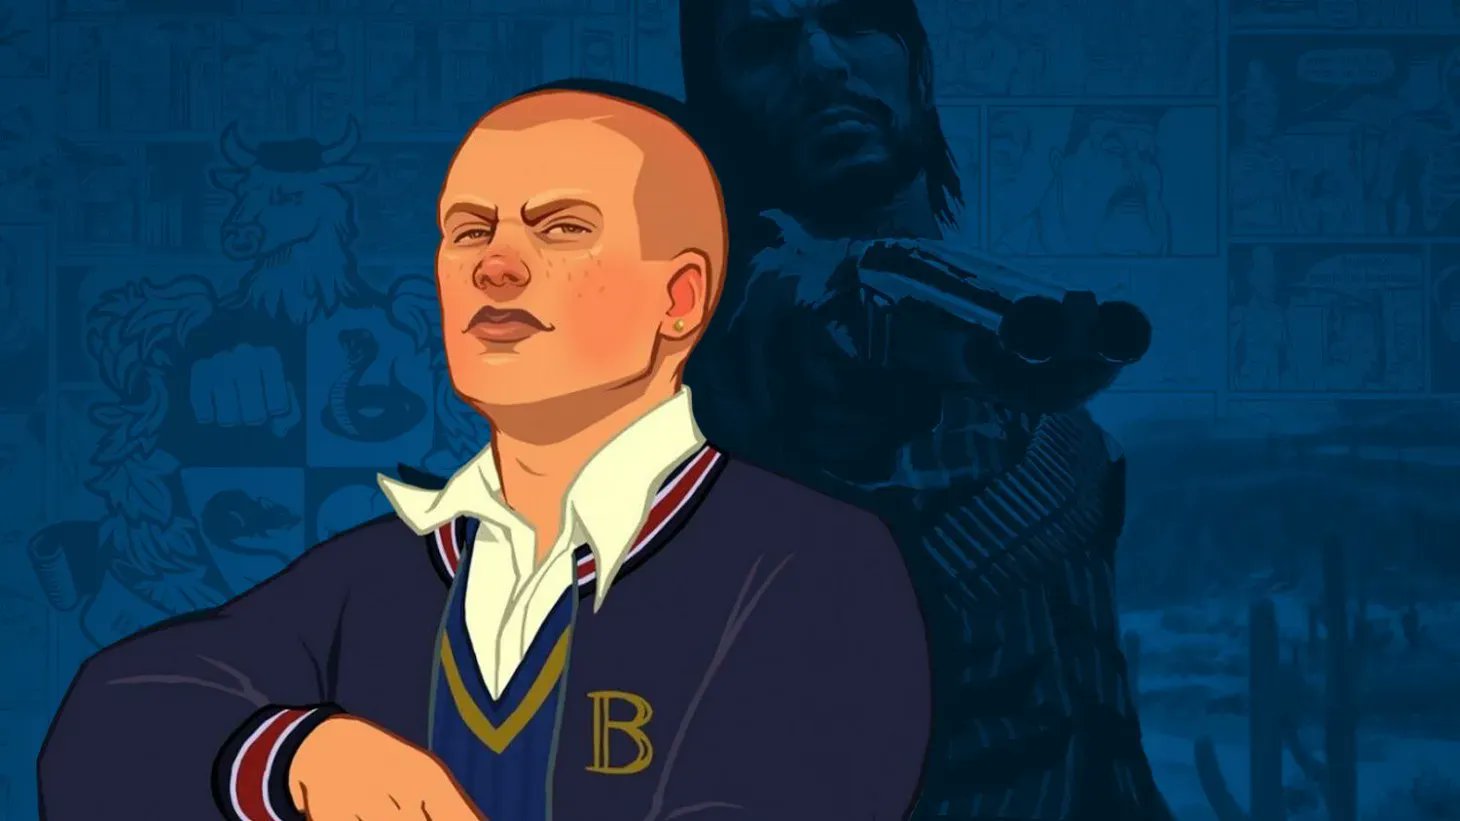 Bully 2 is officially trending on Twitter for the first time this